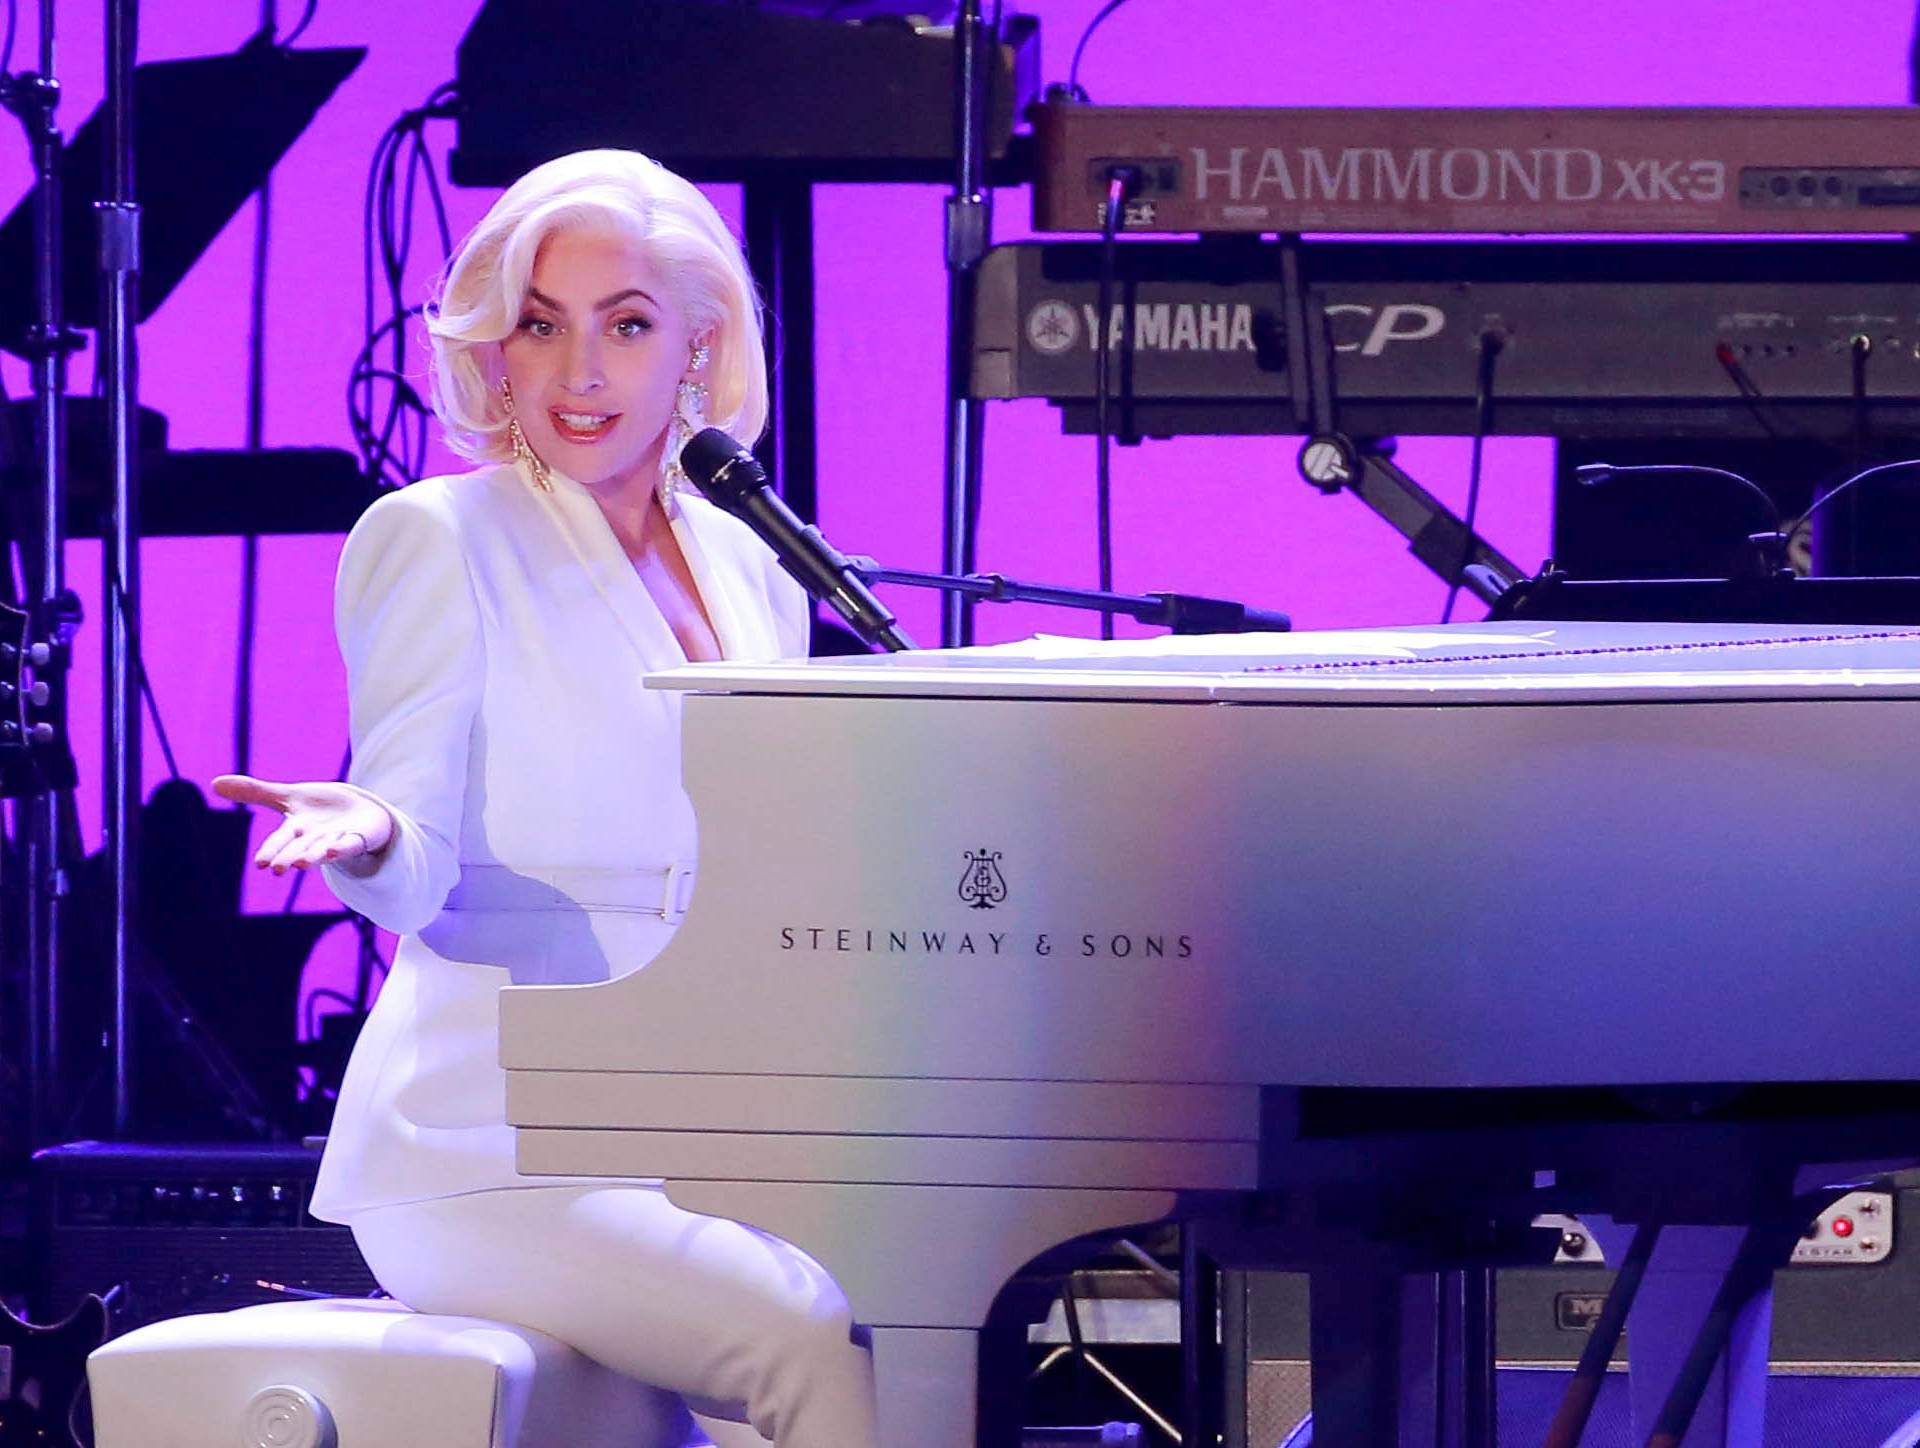 FILE PHOTO: Lady Gaga performs for the five former U.S. presidents, Jimmy Carter, George H.W. Bush, Bill Clinton, George W. Bush, and Barack Obama during a concert at Texas A&M University benefiting hurricane relief efforts in College Station